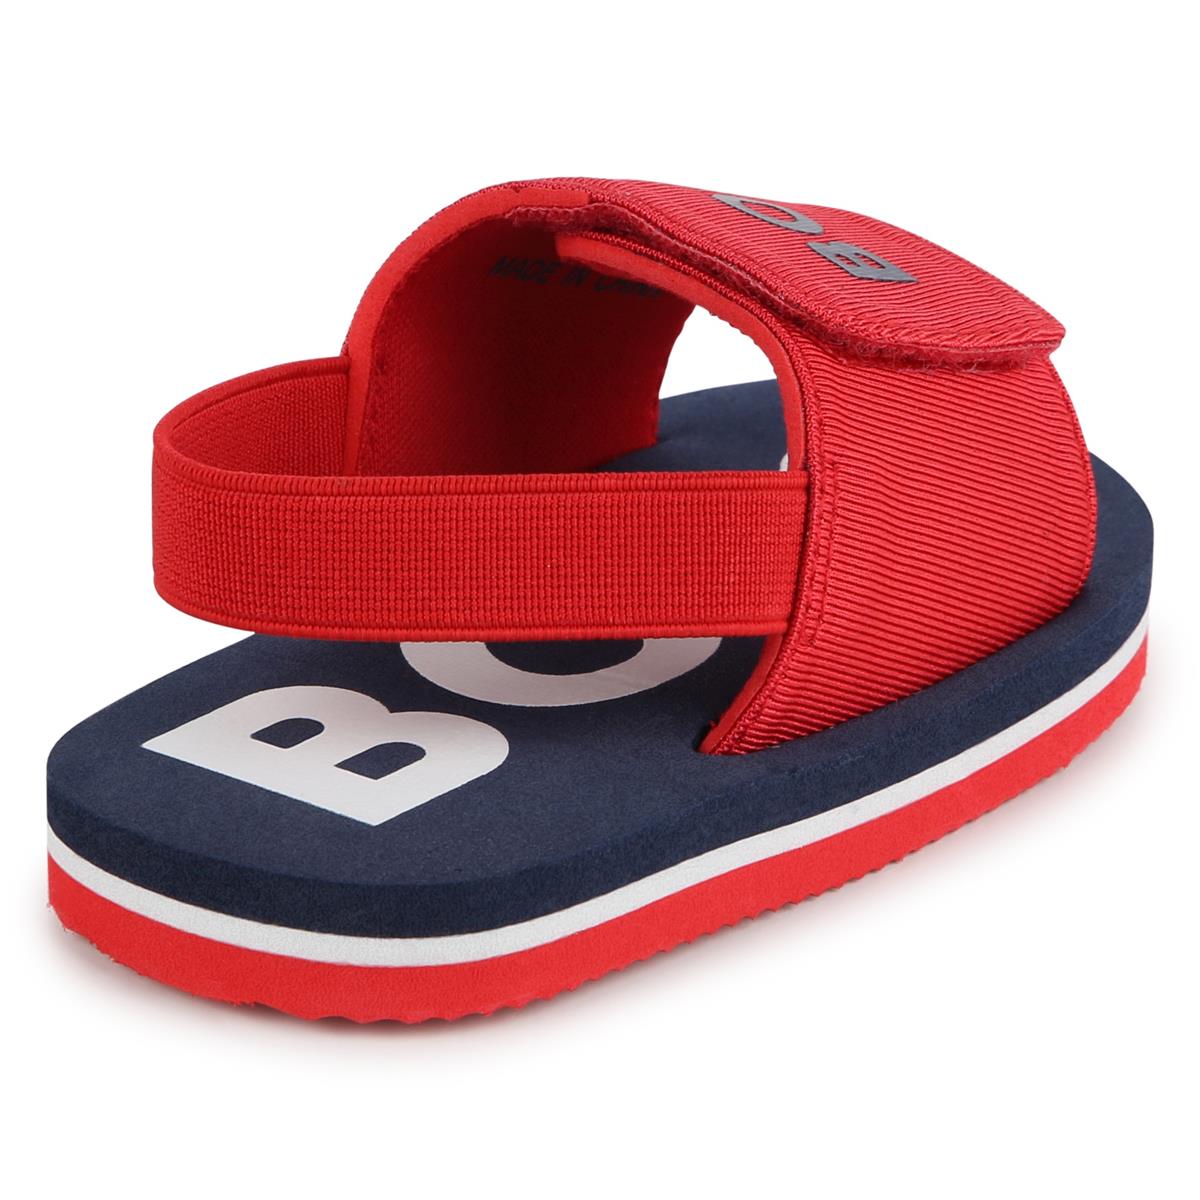 Baby Boys Red Sandals